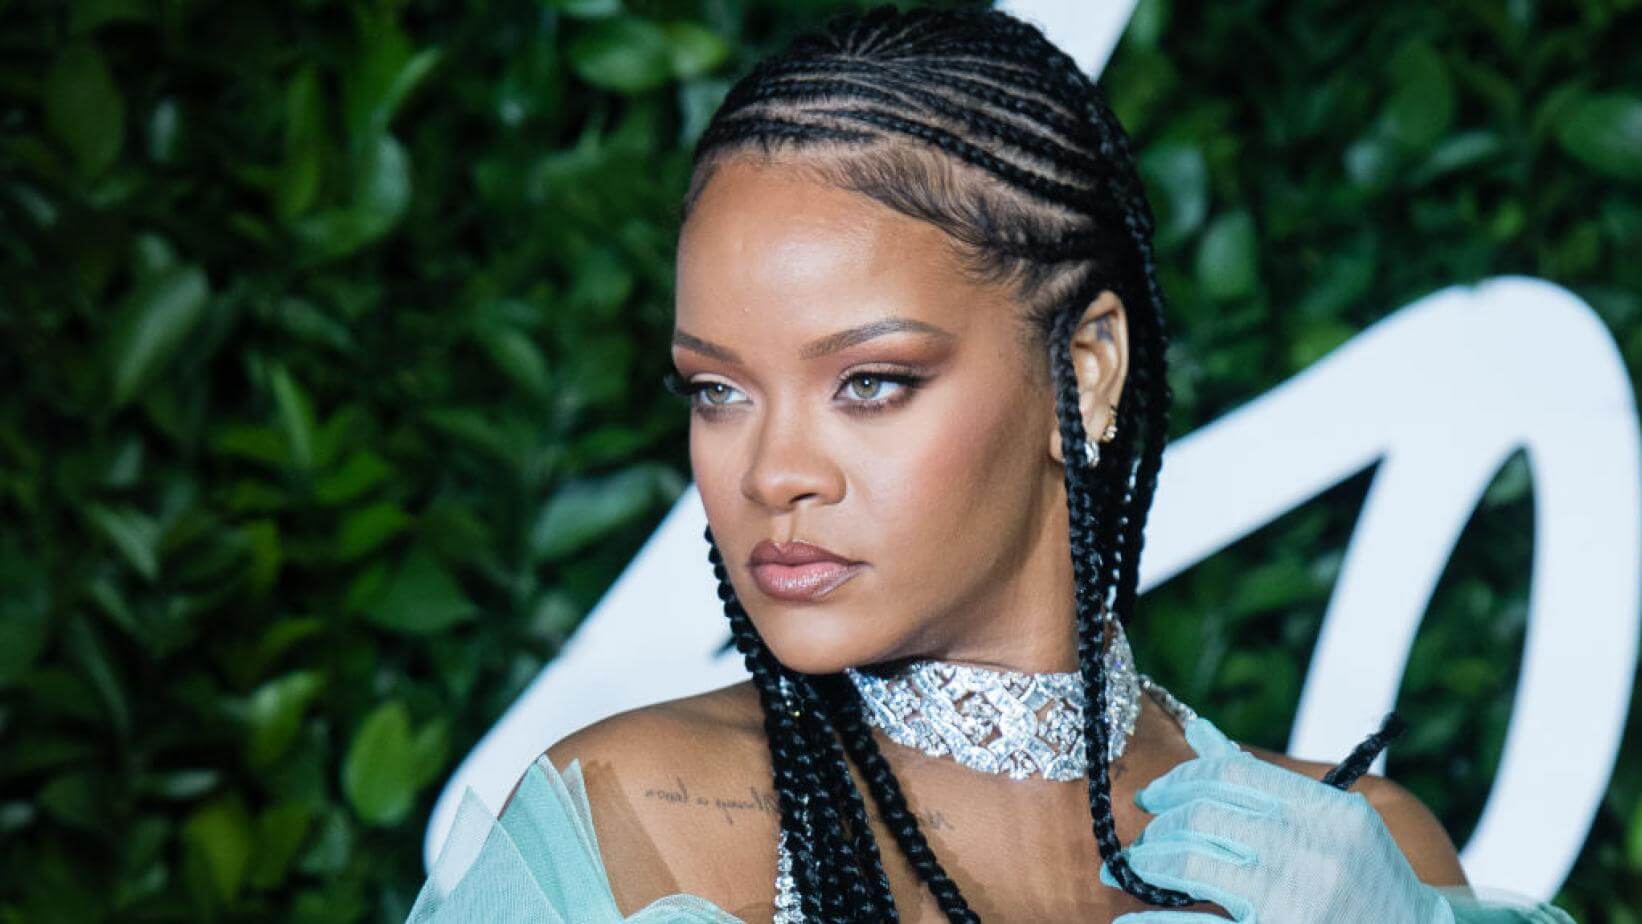 Rihanna's Blue Hair Steals the Show at Awards Ceremony - wide 7